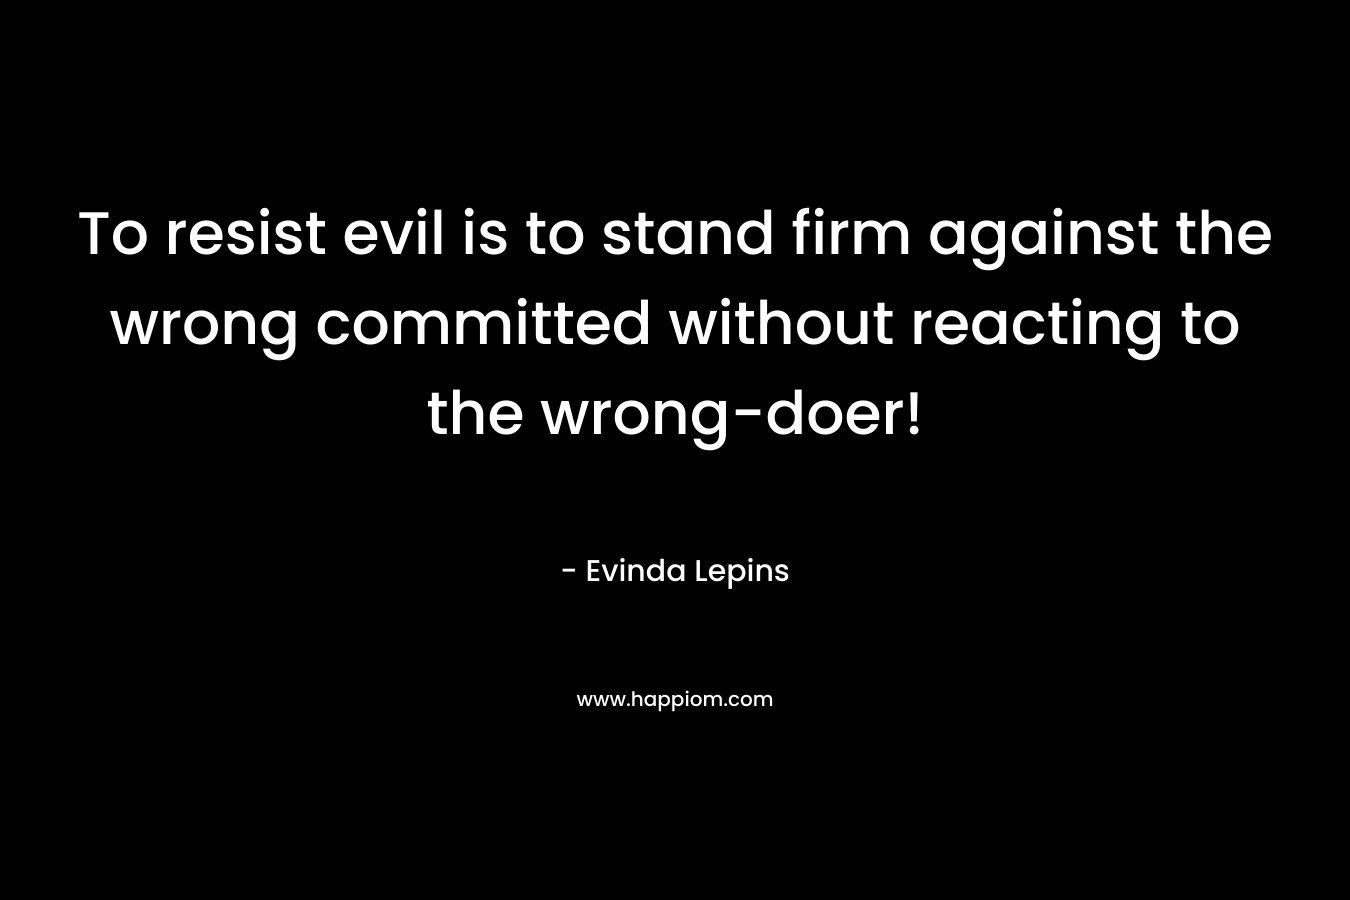 To resist evil is to stand firm against the wrong committed without reacting to the wrong-doer! – Evinda Lepins